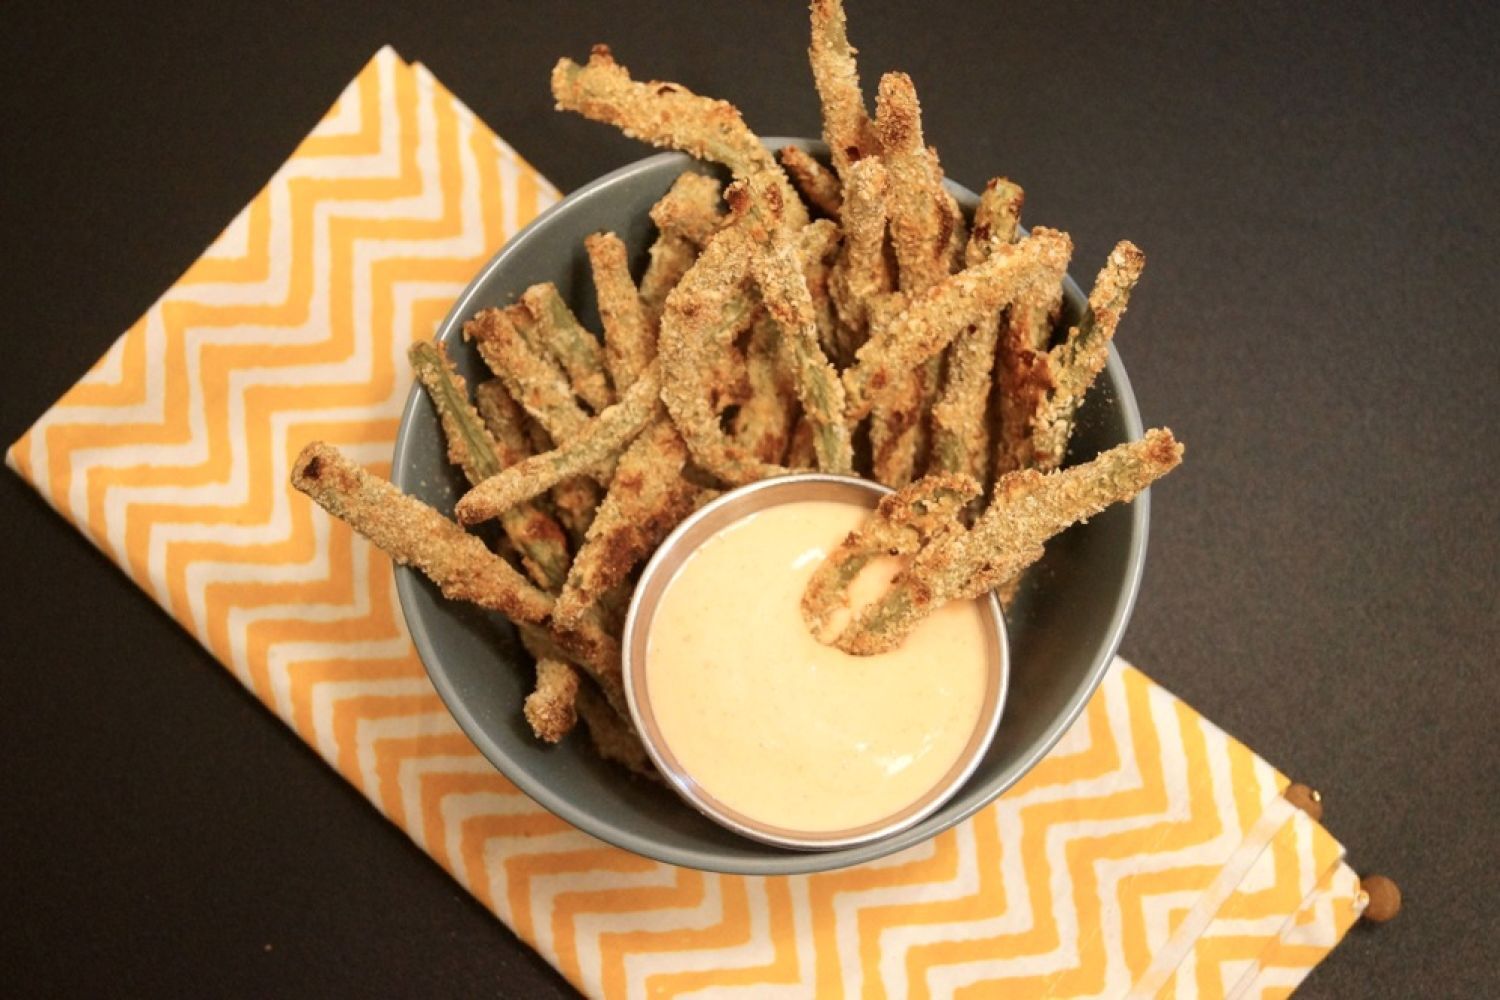 Green bean fries in a bowl with a crispy coating and sauce on the side.